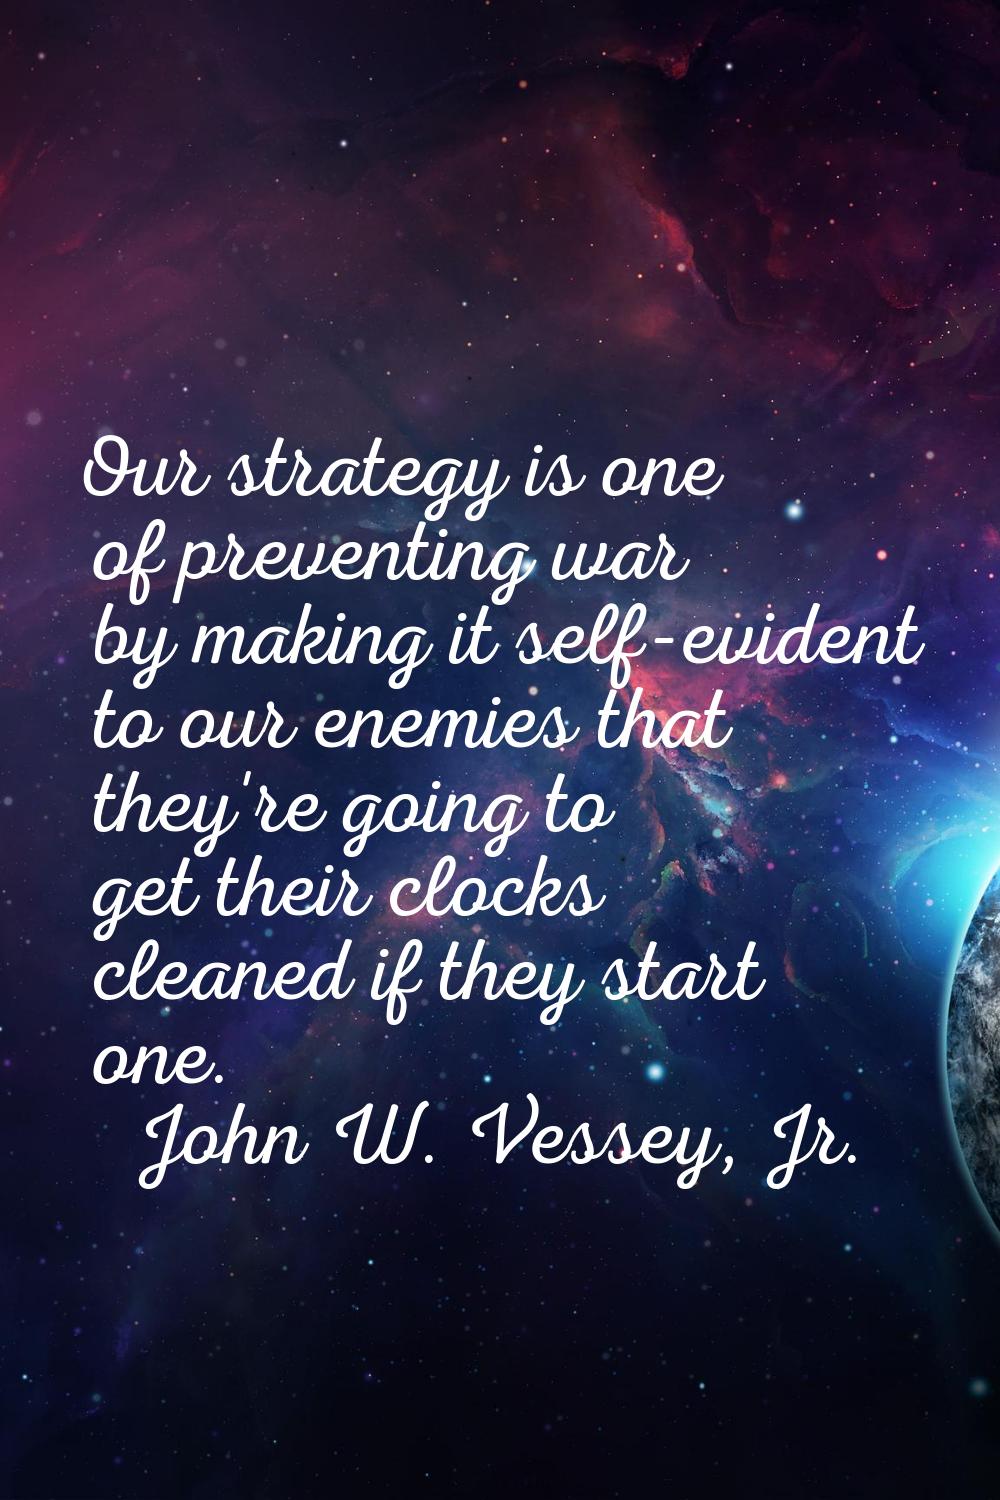 Our strategy is one of preventing war by making it self-evident to our enemies that they're going t